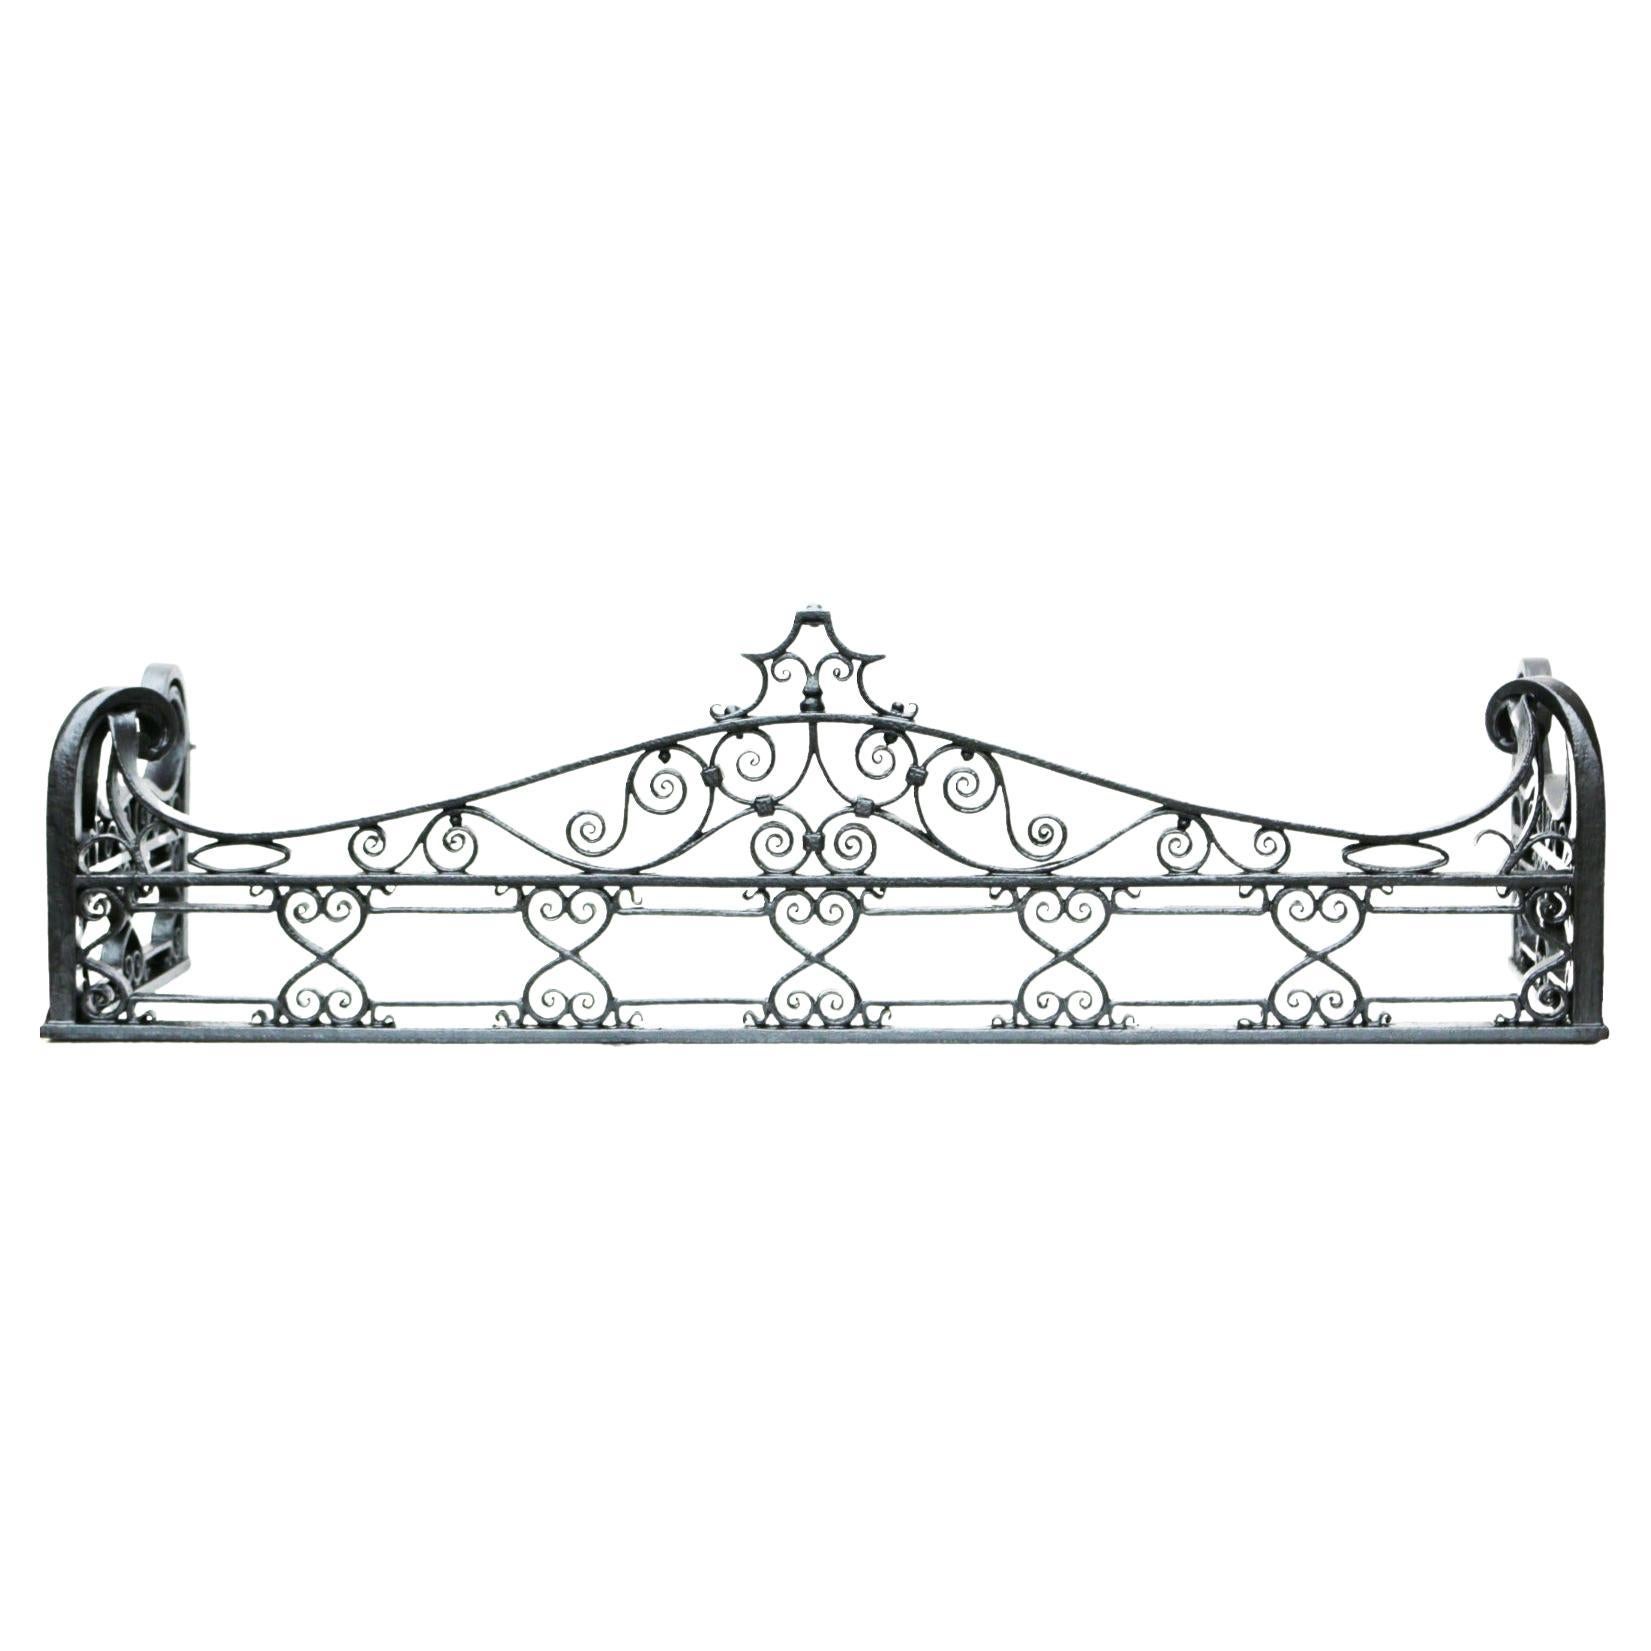 Antique Wrought Iron Fireplace Surround For Sale